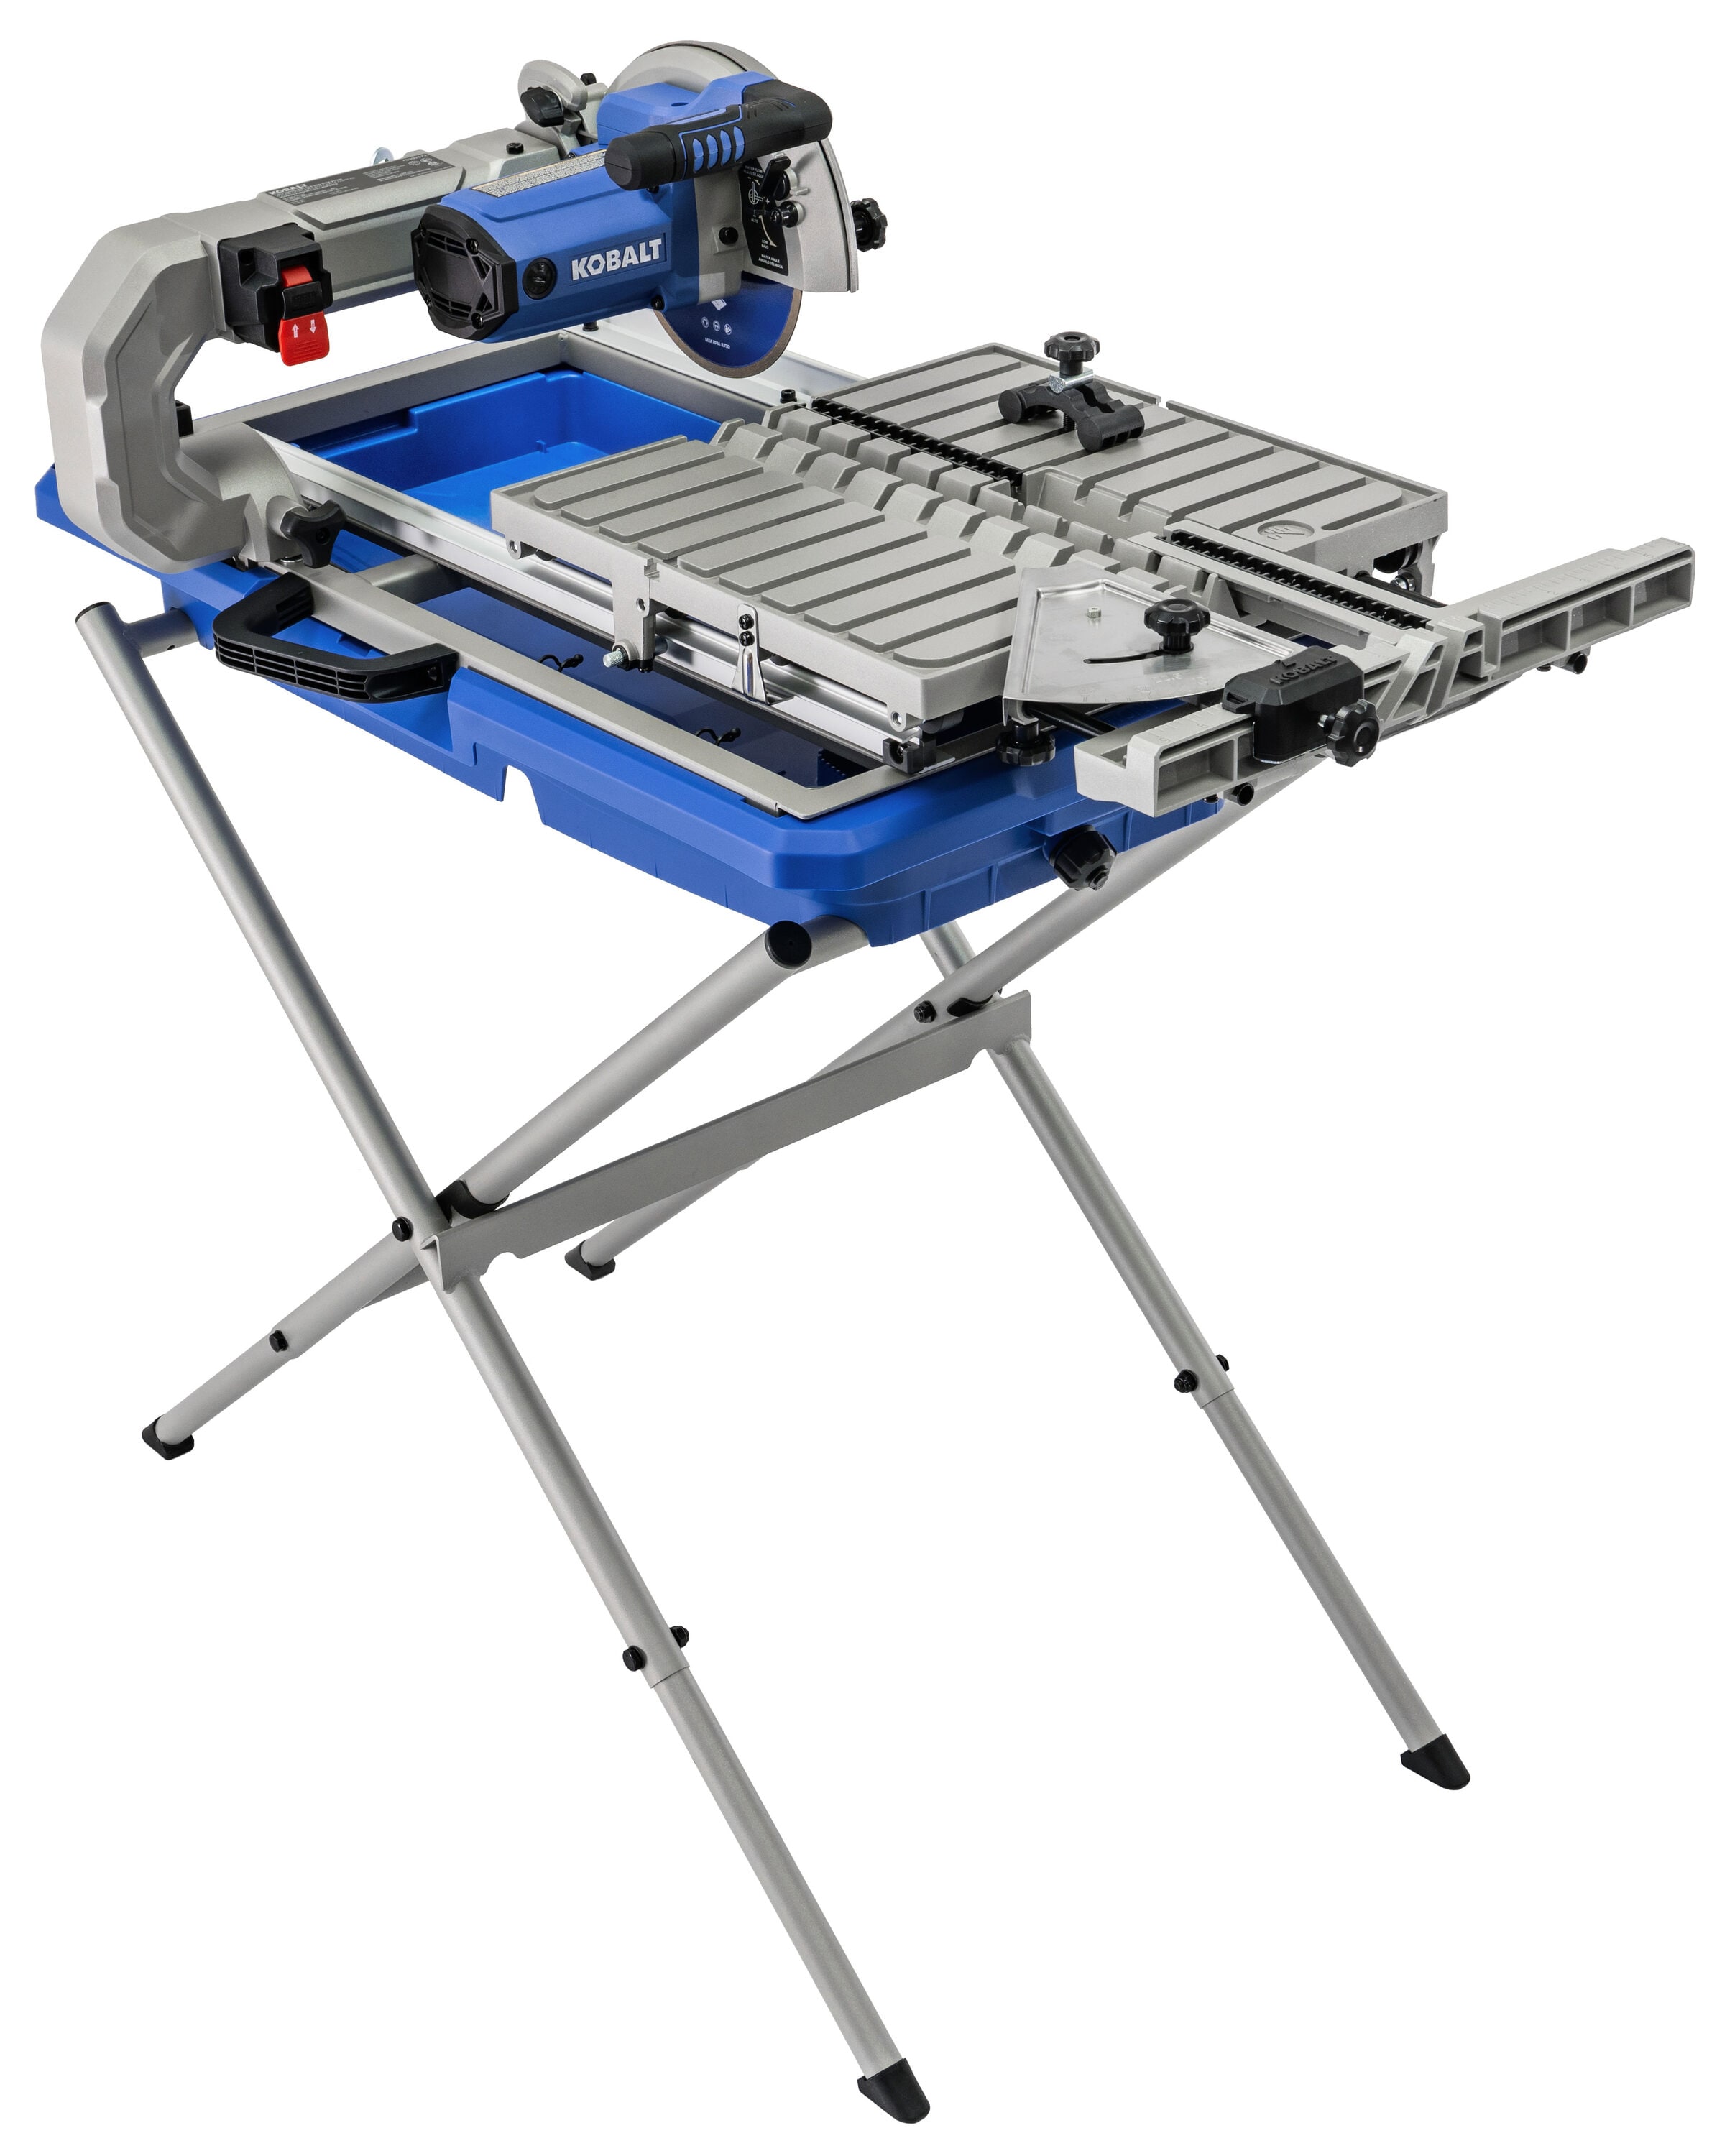 9-Amp 7-in-Blade Corded Sliding Table Tile Saw with Stand | - Kobalt SC1802LW